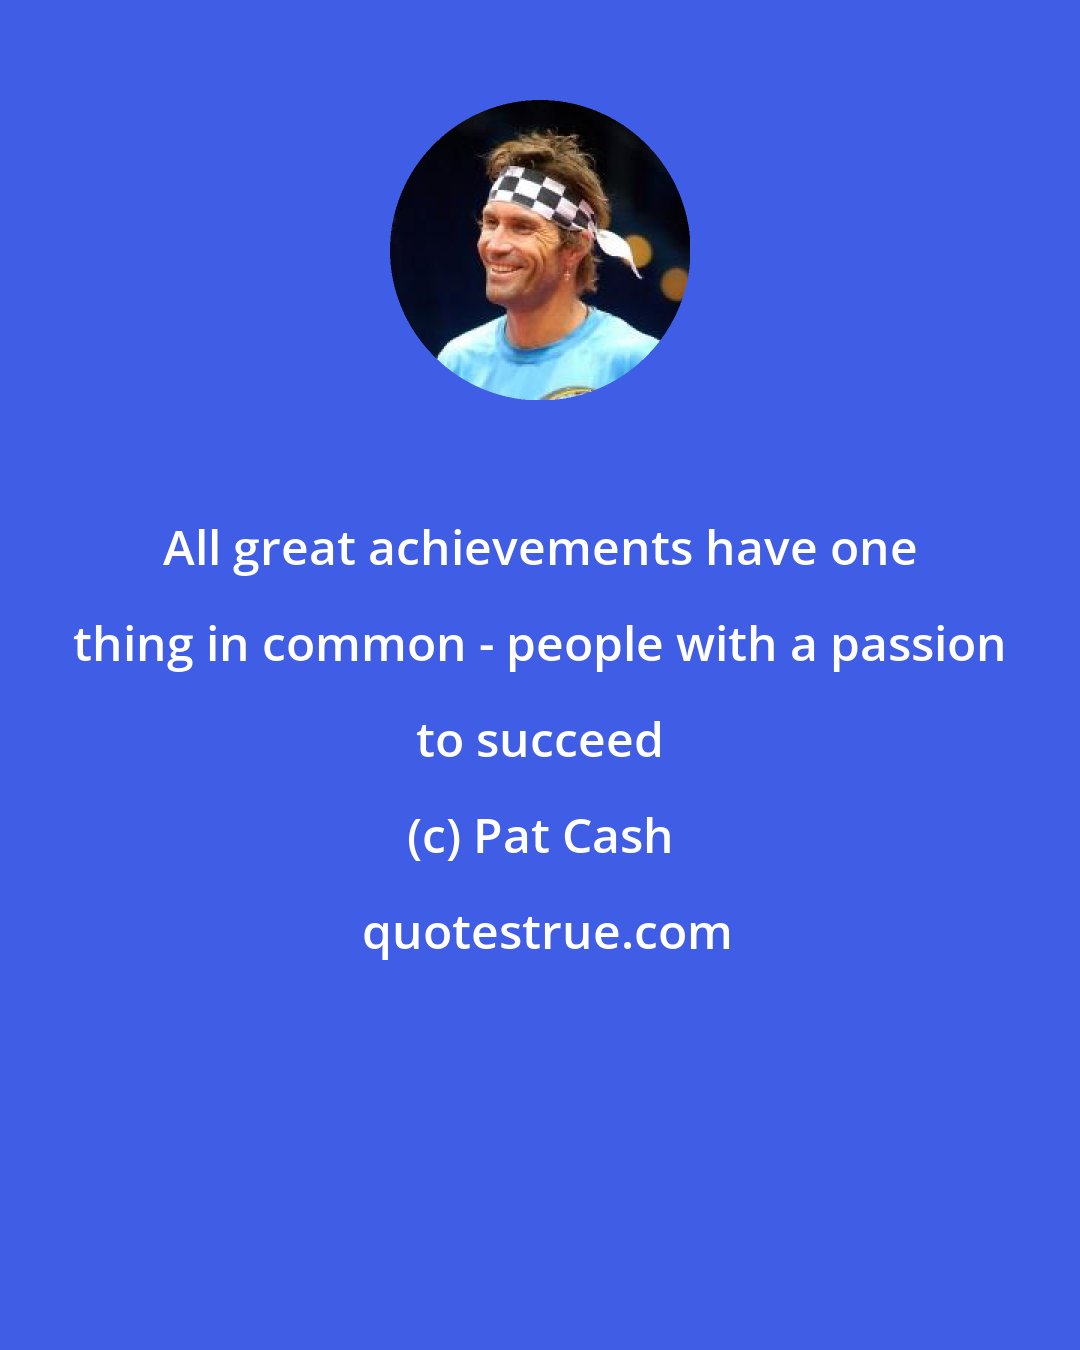 Pat Cash: All great achievements have one thing in common - people with a passion to succeed